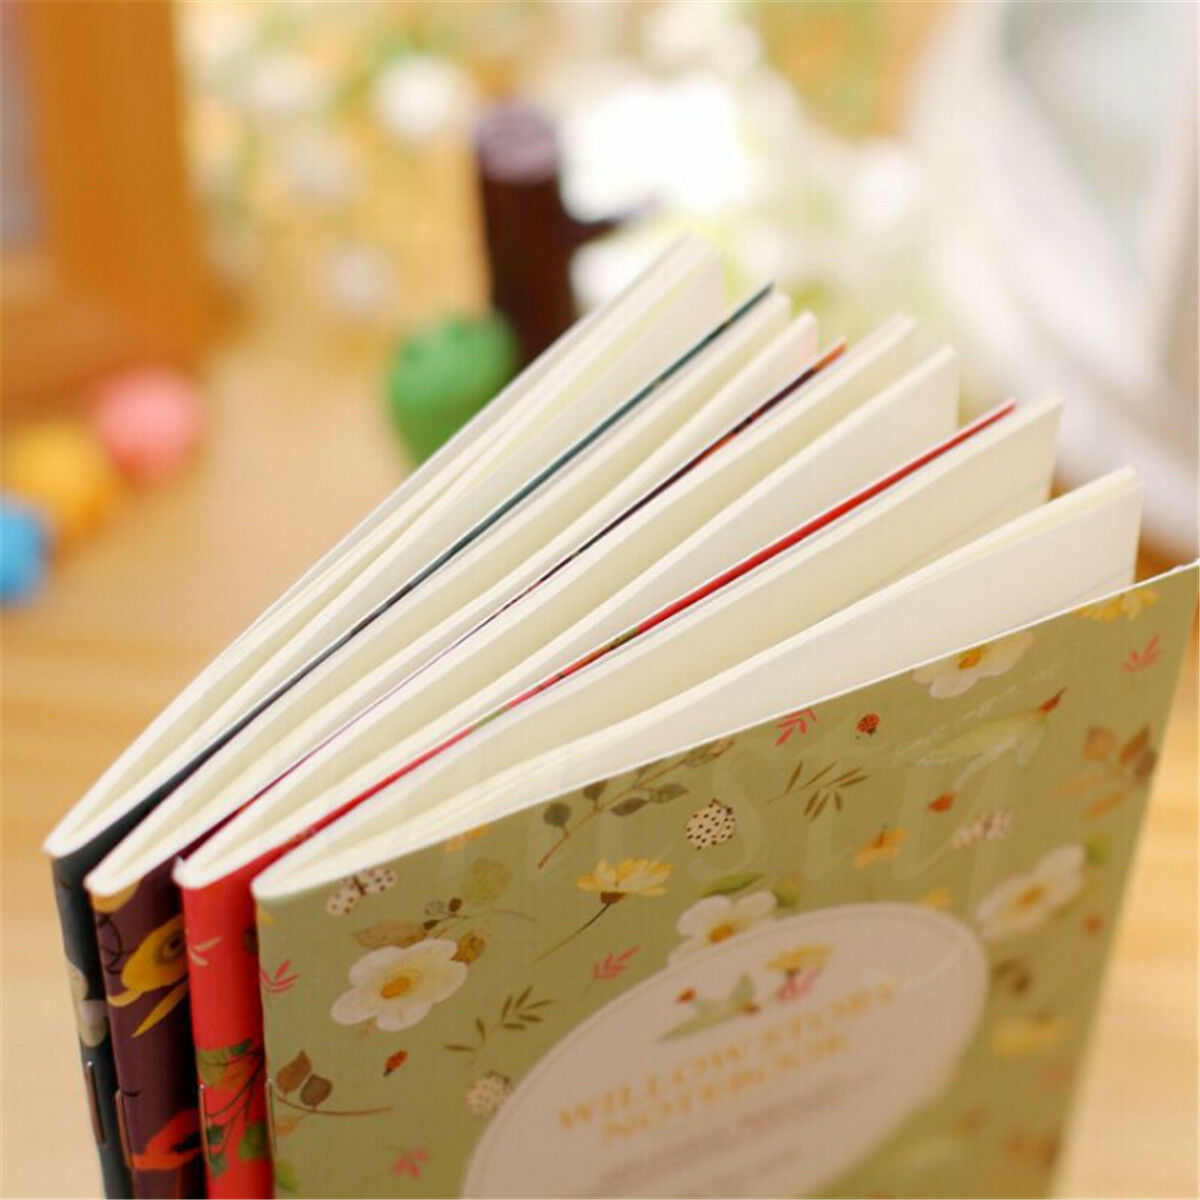 Flower Bird Pocket Notebook Journals Paper Diary Weekly Planner Writing Pad Note